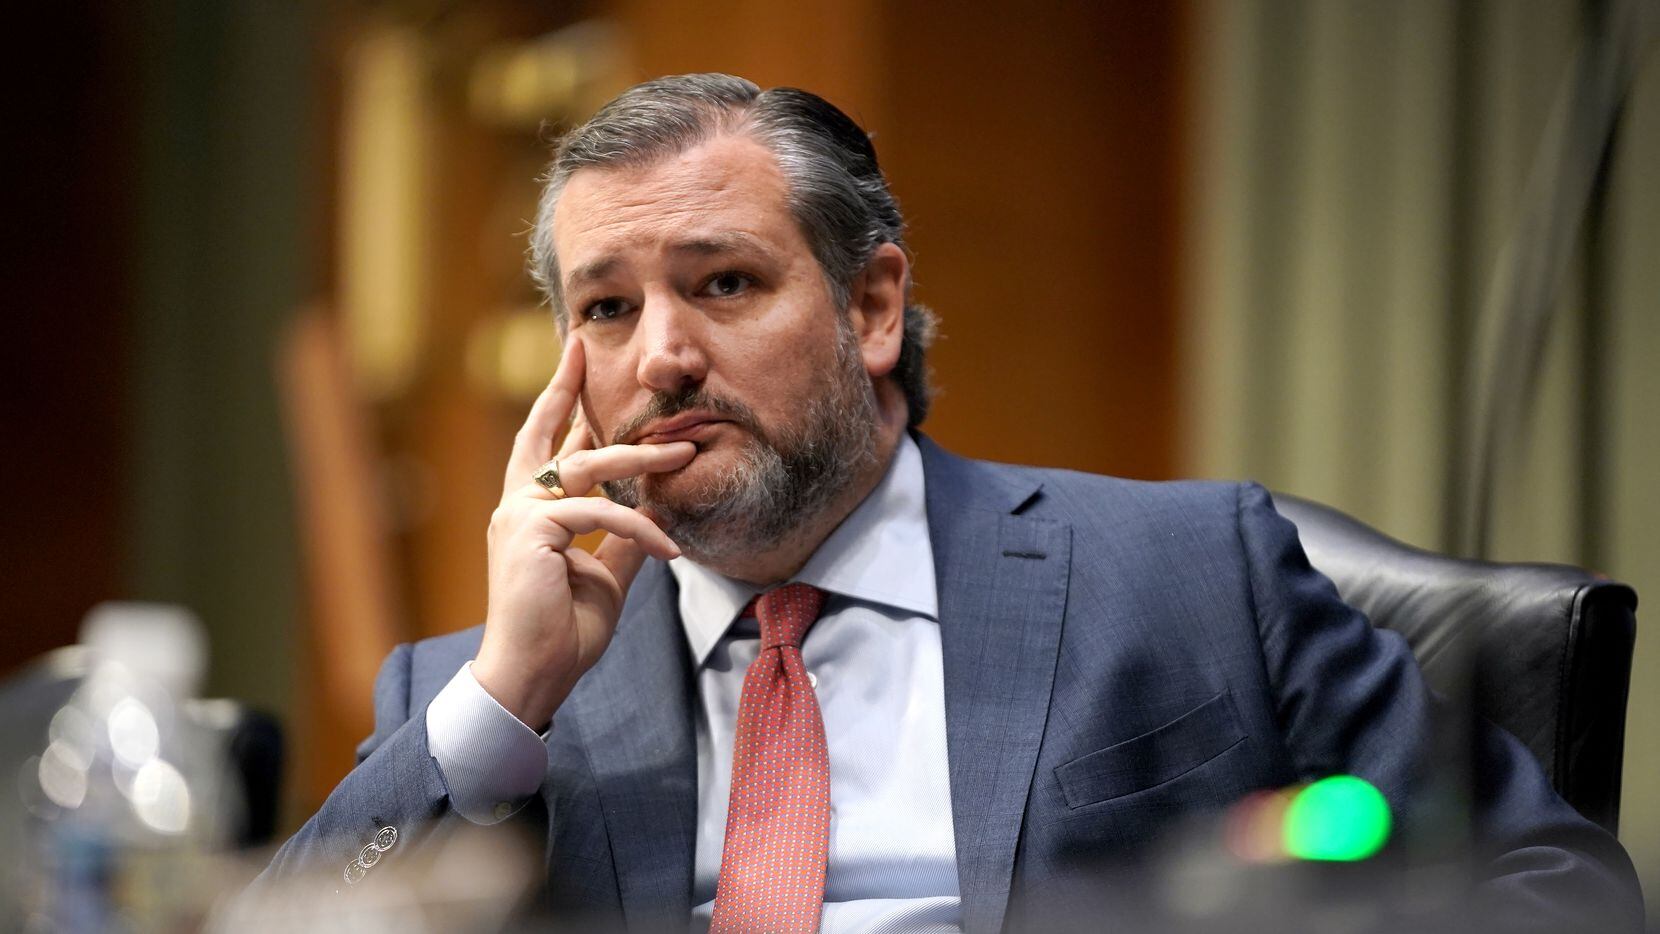 Sen. Ted Cruz at the confirmation hearing for Samantha Power, nominee to be administrator of the U.S. Agency for International Development, on March 23, 2021.